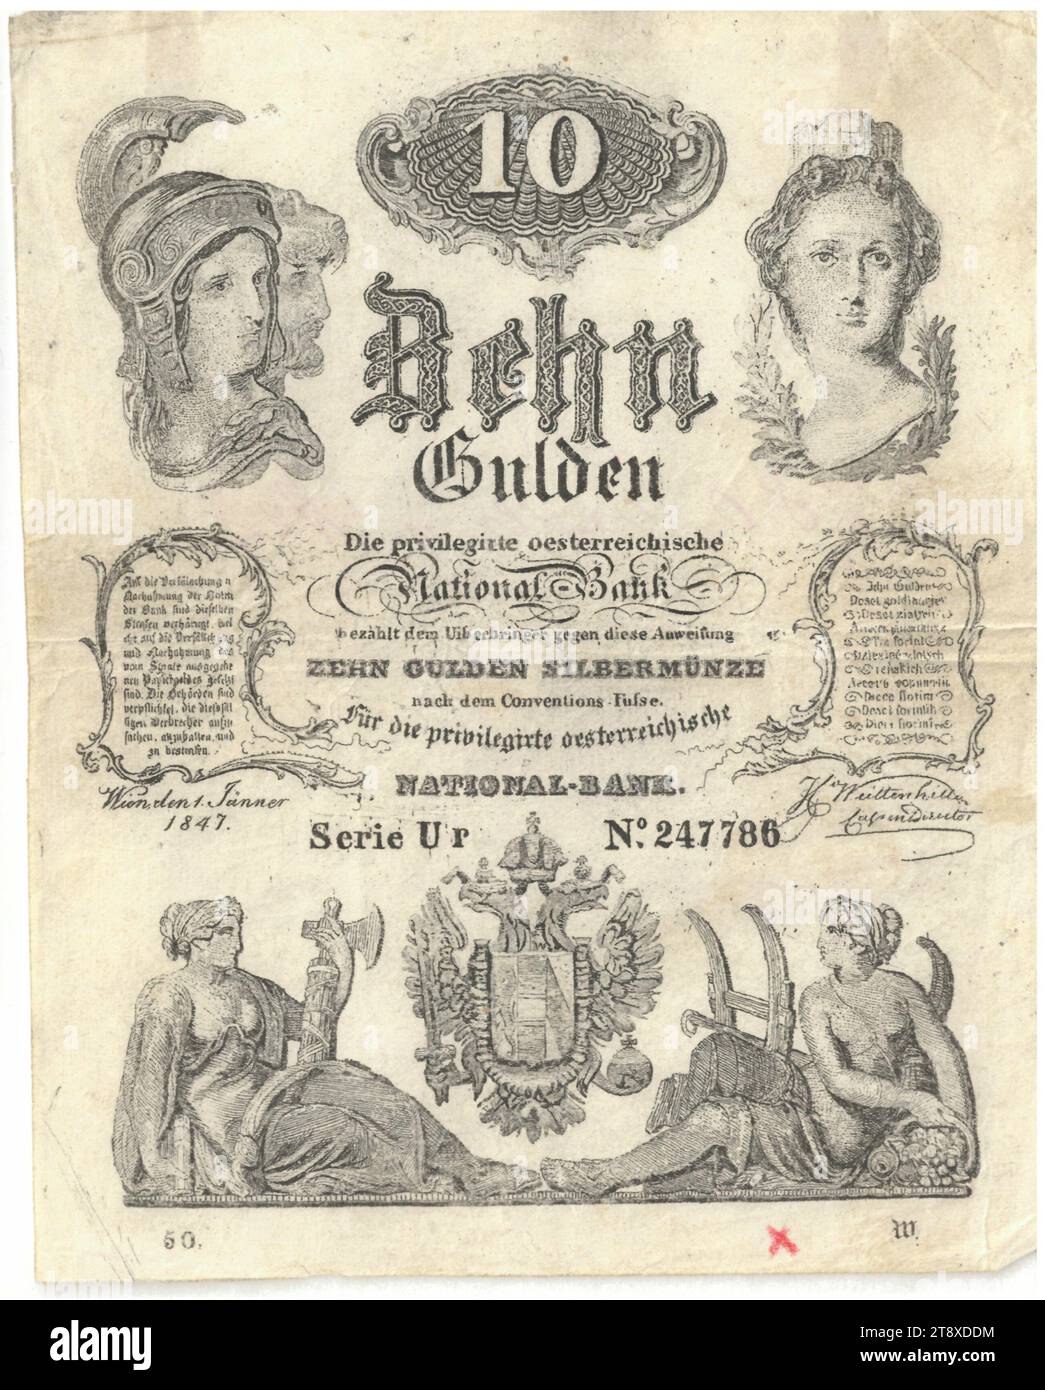 Instruction (forgery), 10 florins, Privilegierte Österreichische National-Bank, mint authority, Date after 01.01.1847, paper, printing, width 107 mm, height 133 mm, Mint, Vienna, Mint territory, Austria, Empire (1804-1867), Finance, counterfeit, forgery, woman, helmet, coat of arms (as symbol of the state, etc.), bank-note, money, The Vienna Collection Stock Photo